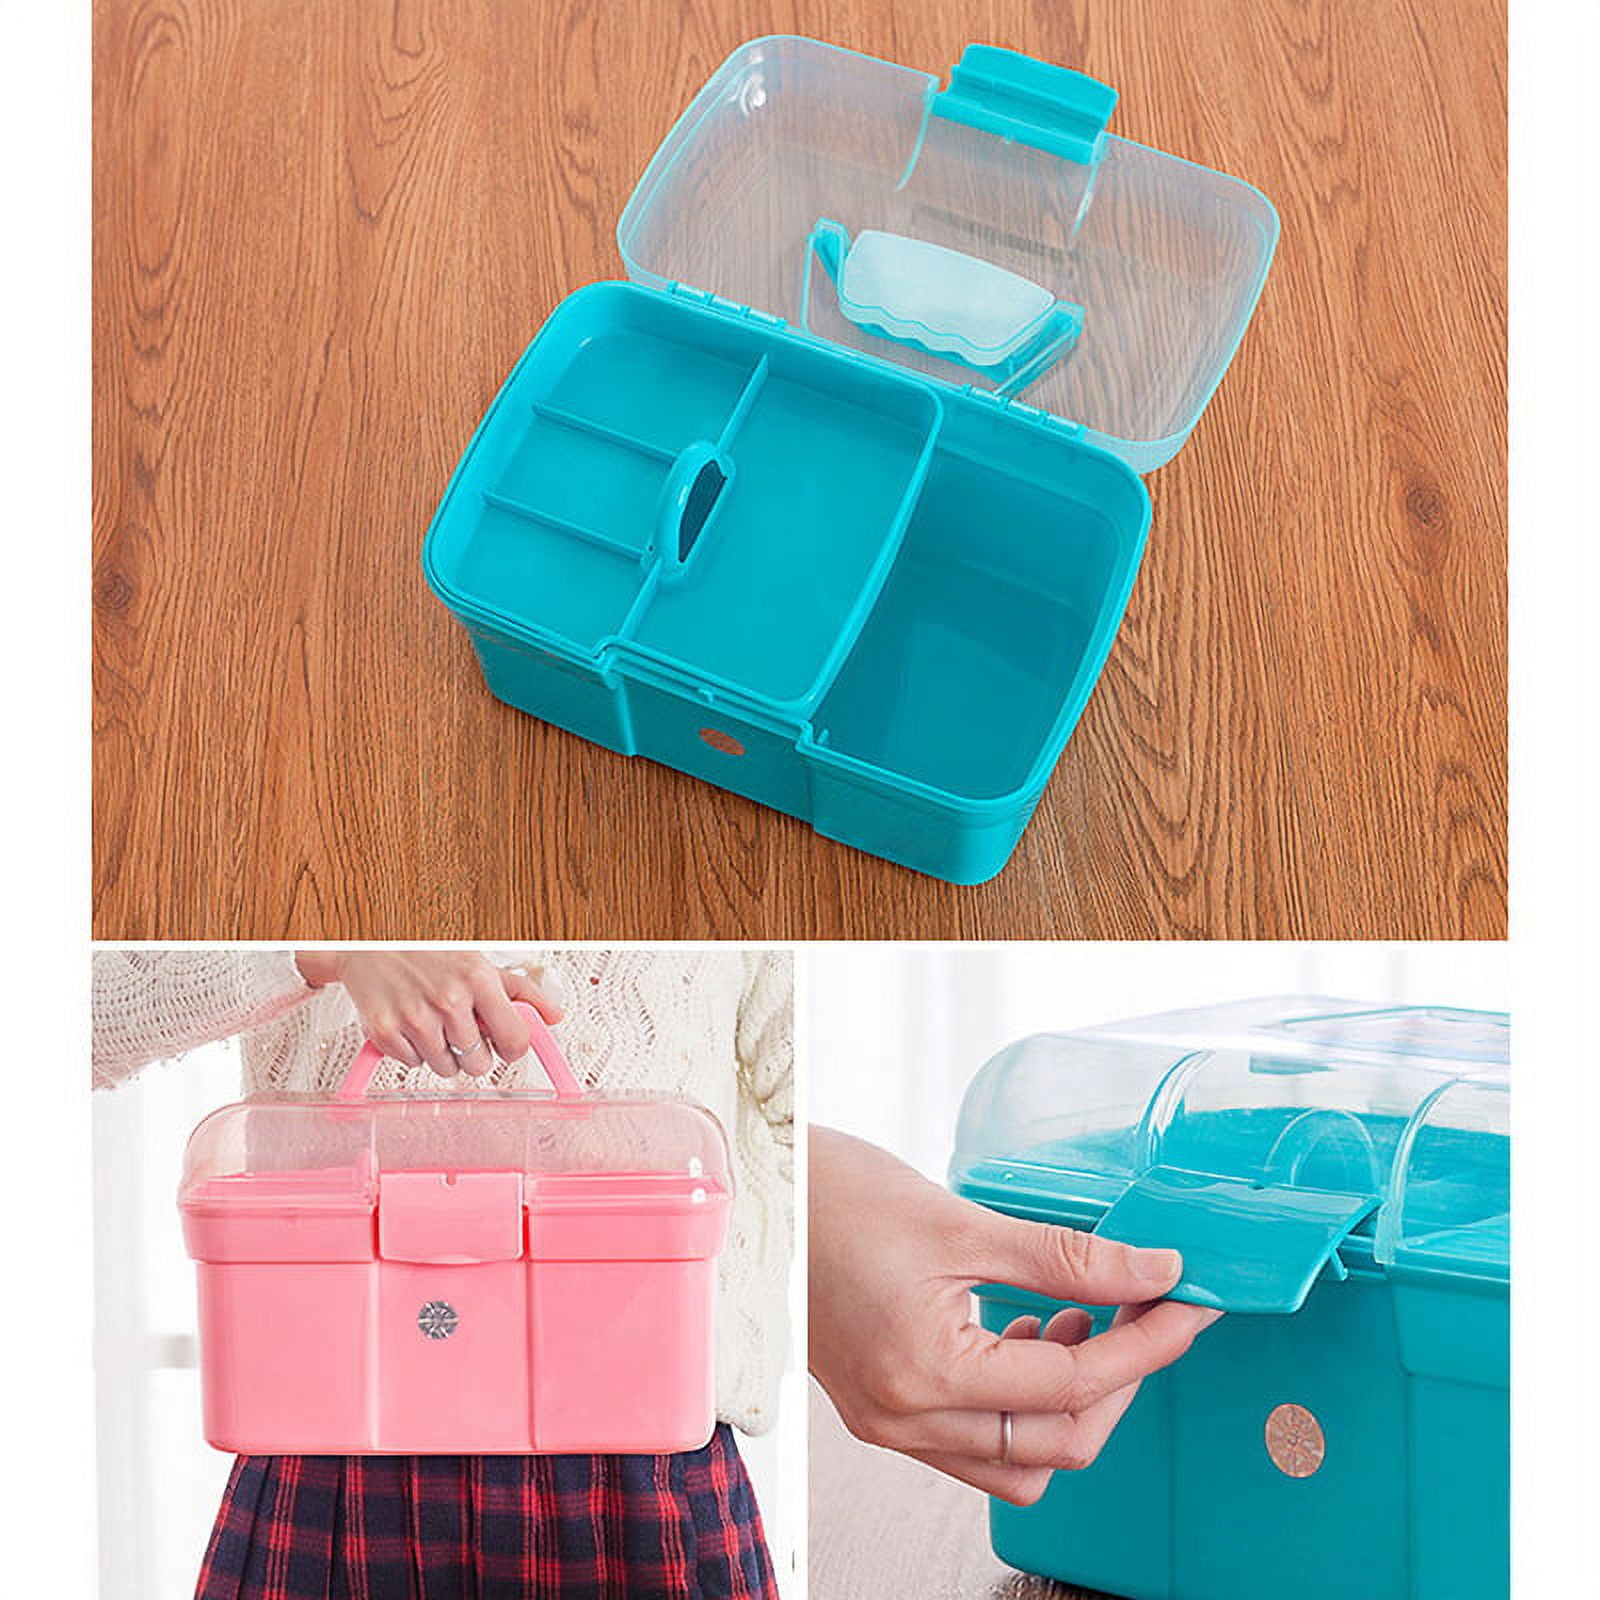 Multifunction Nail Art Tools Storage Box Beauty Scissors Nail Lamp  Organizer Jewelry Nail Polish Container Manicure Tools Case